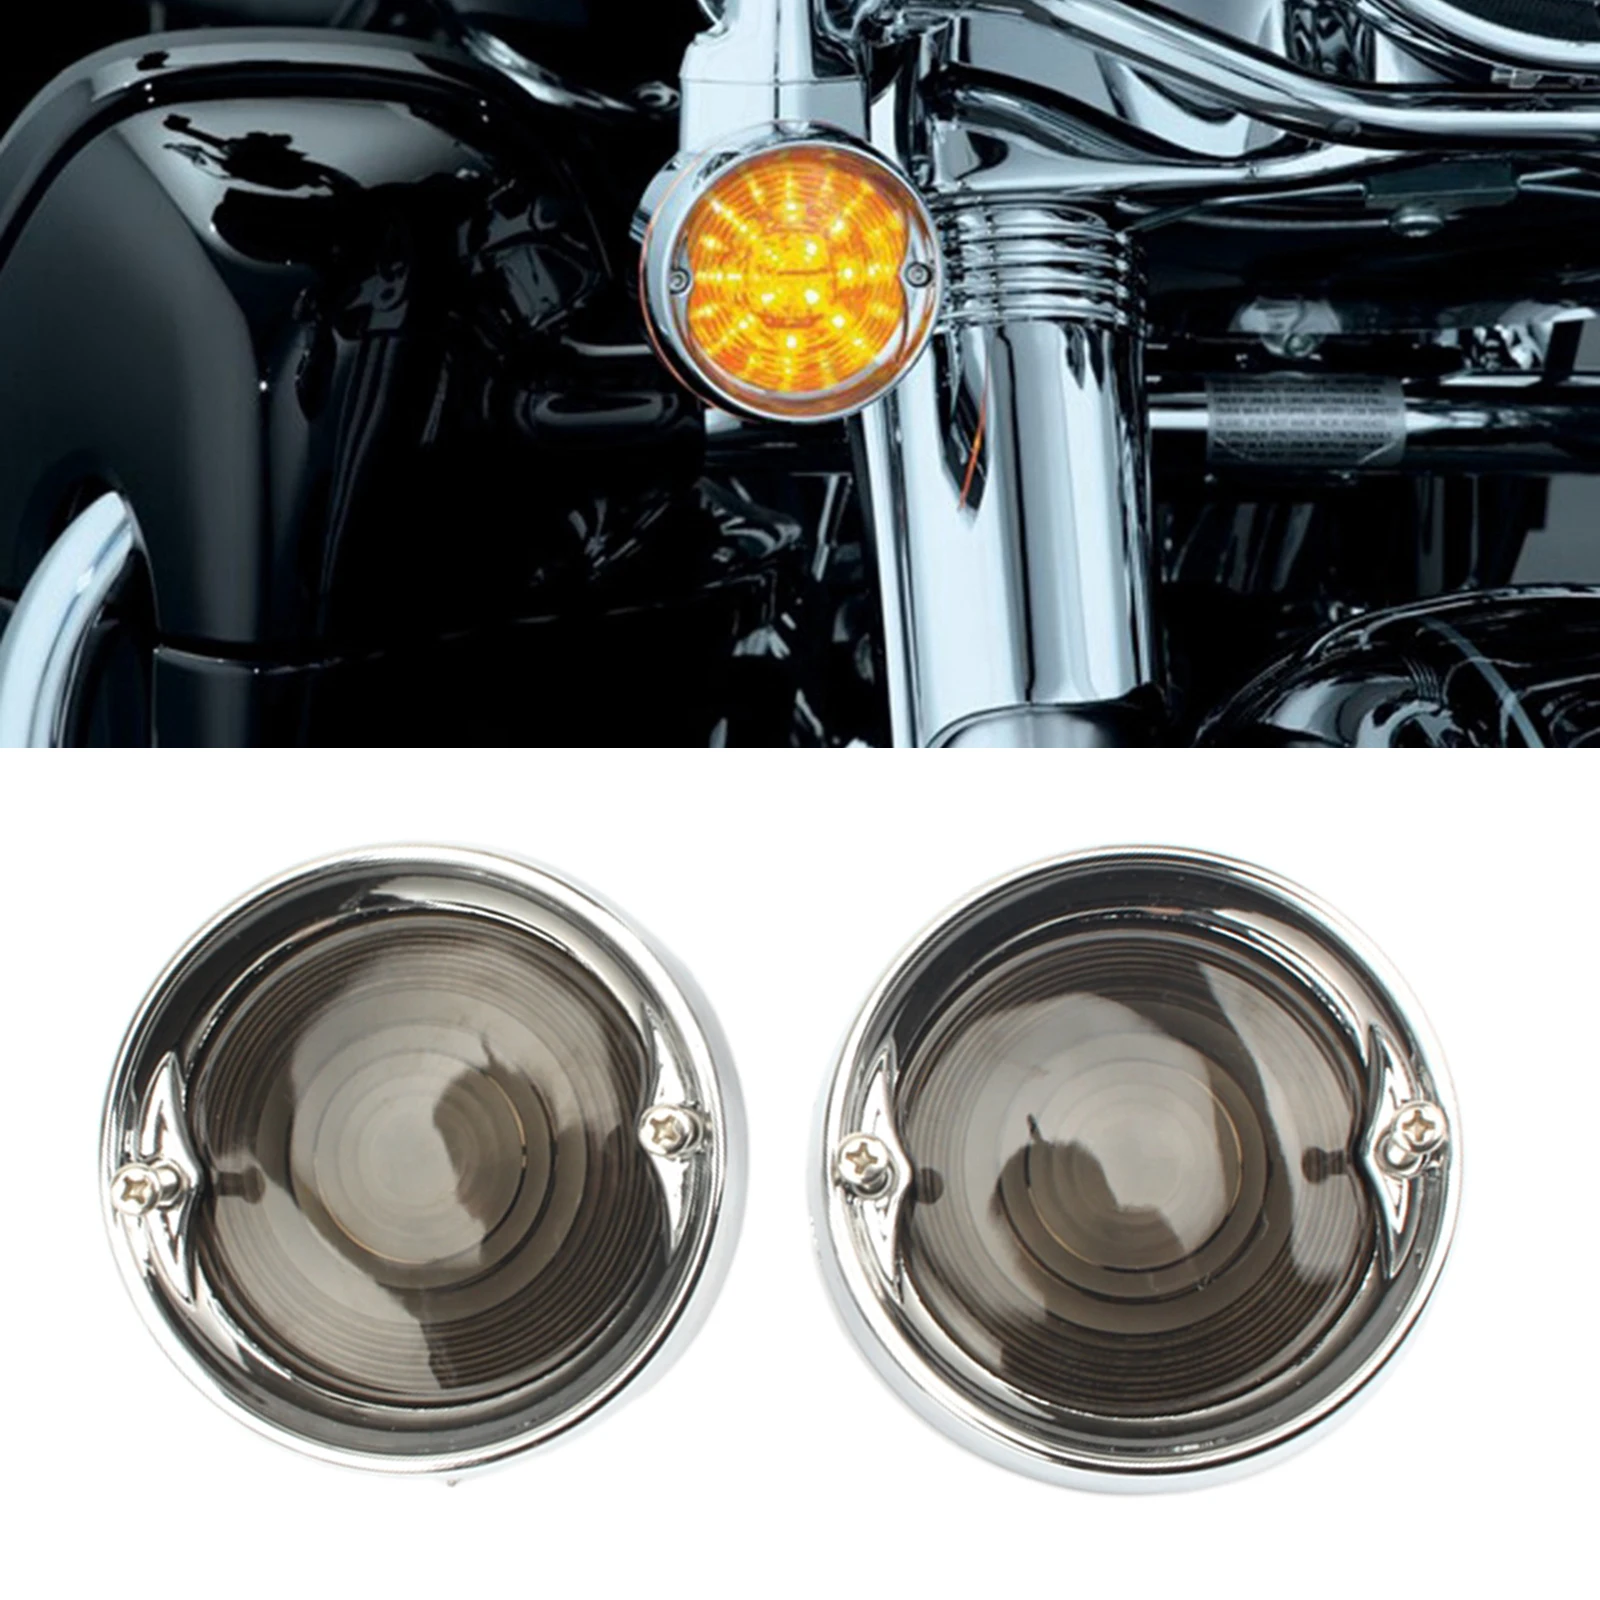 2Pcs Motorcycle Turn Signal Light Bezels Lens Cover Visor Trim Rings For Harley Touring | Автомобили и мотоциклы